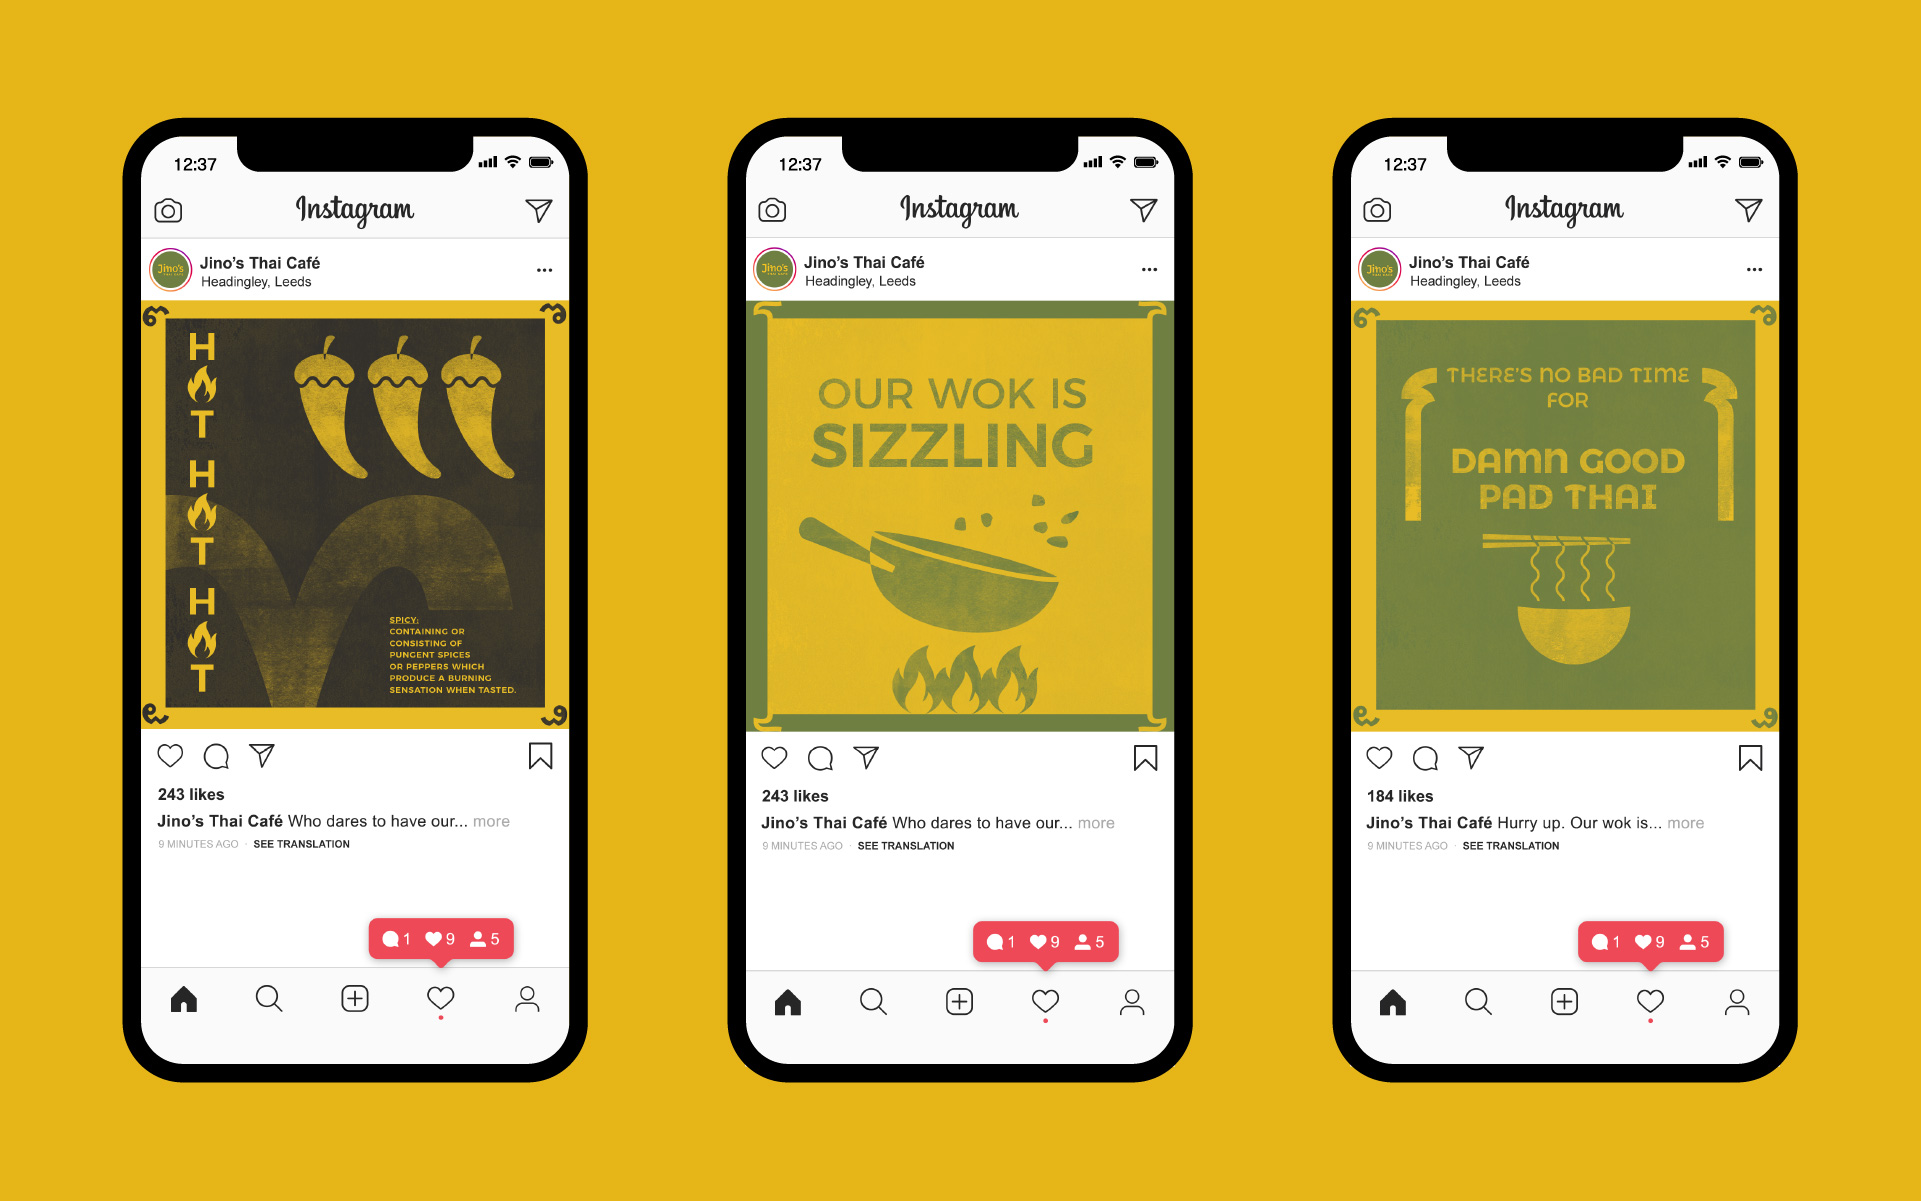 Bespoke made instagram post templates to help Jino achieve a distinctive yet coherent feel online